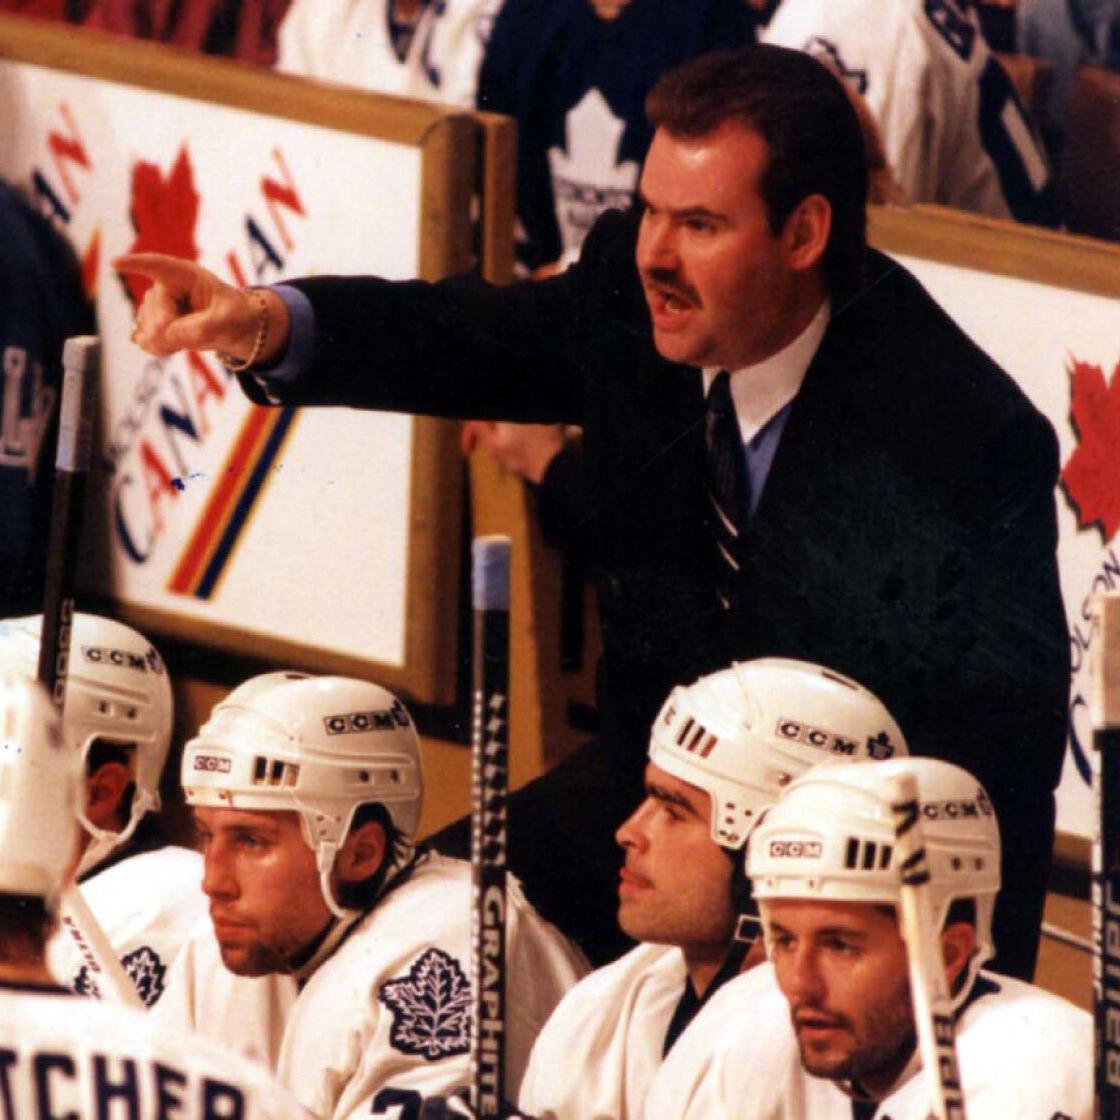 Pat Burns Will Be Inducted Into Hockey Hall of Fame - The New York Times